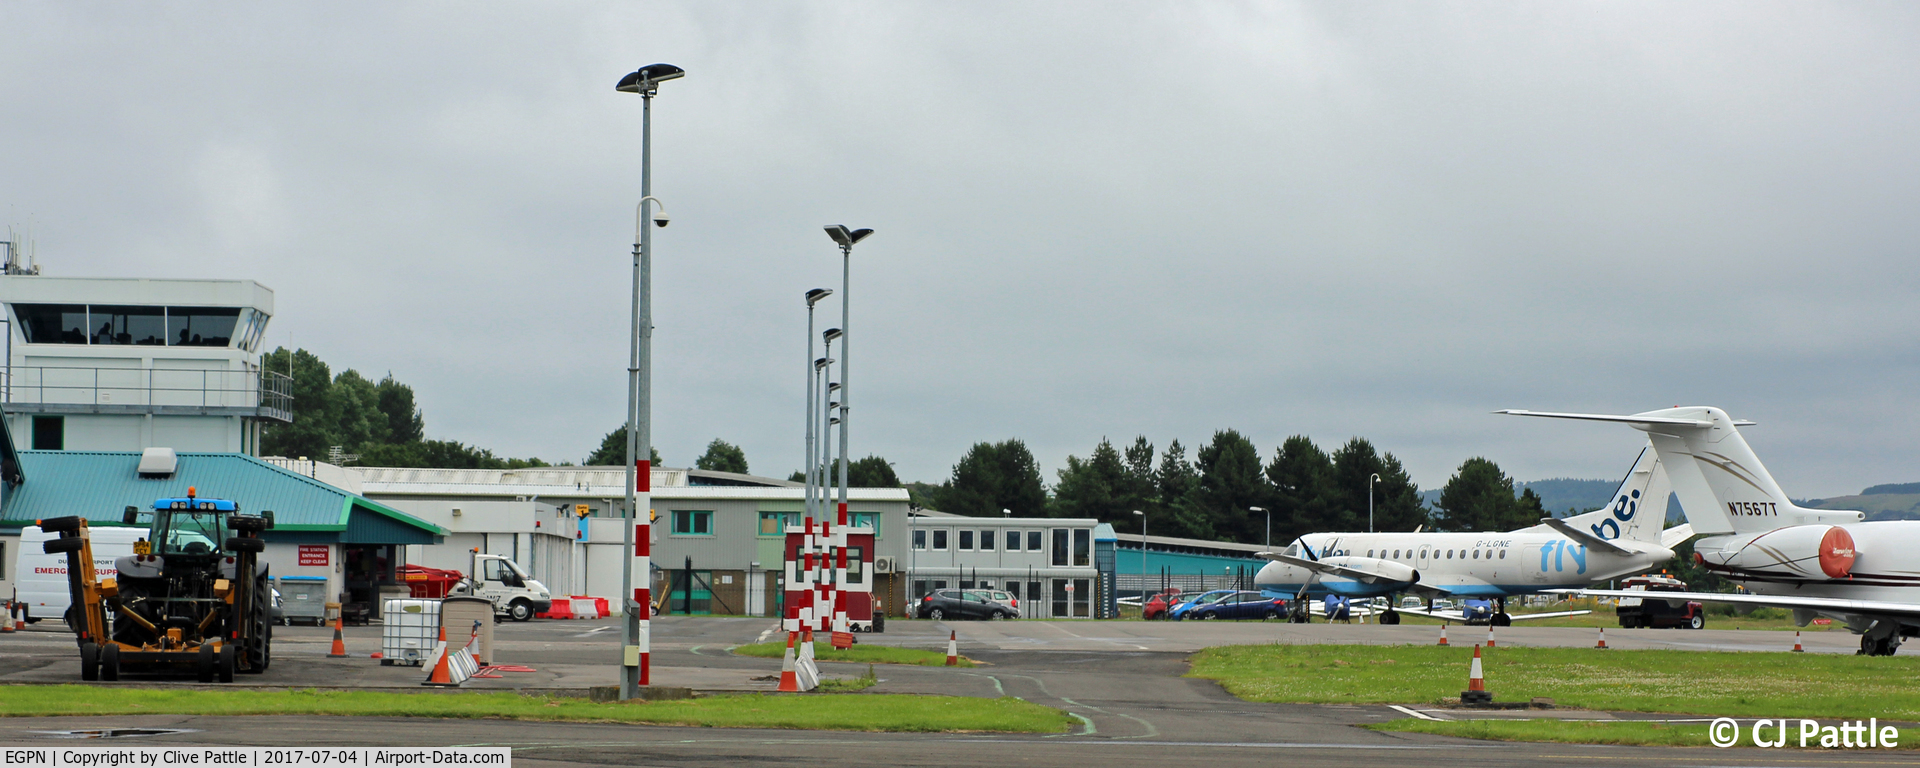 Dundee Airport, Dundee, Scotland United Kingdom (EGPN) - Dundee Terminal and apron view